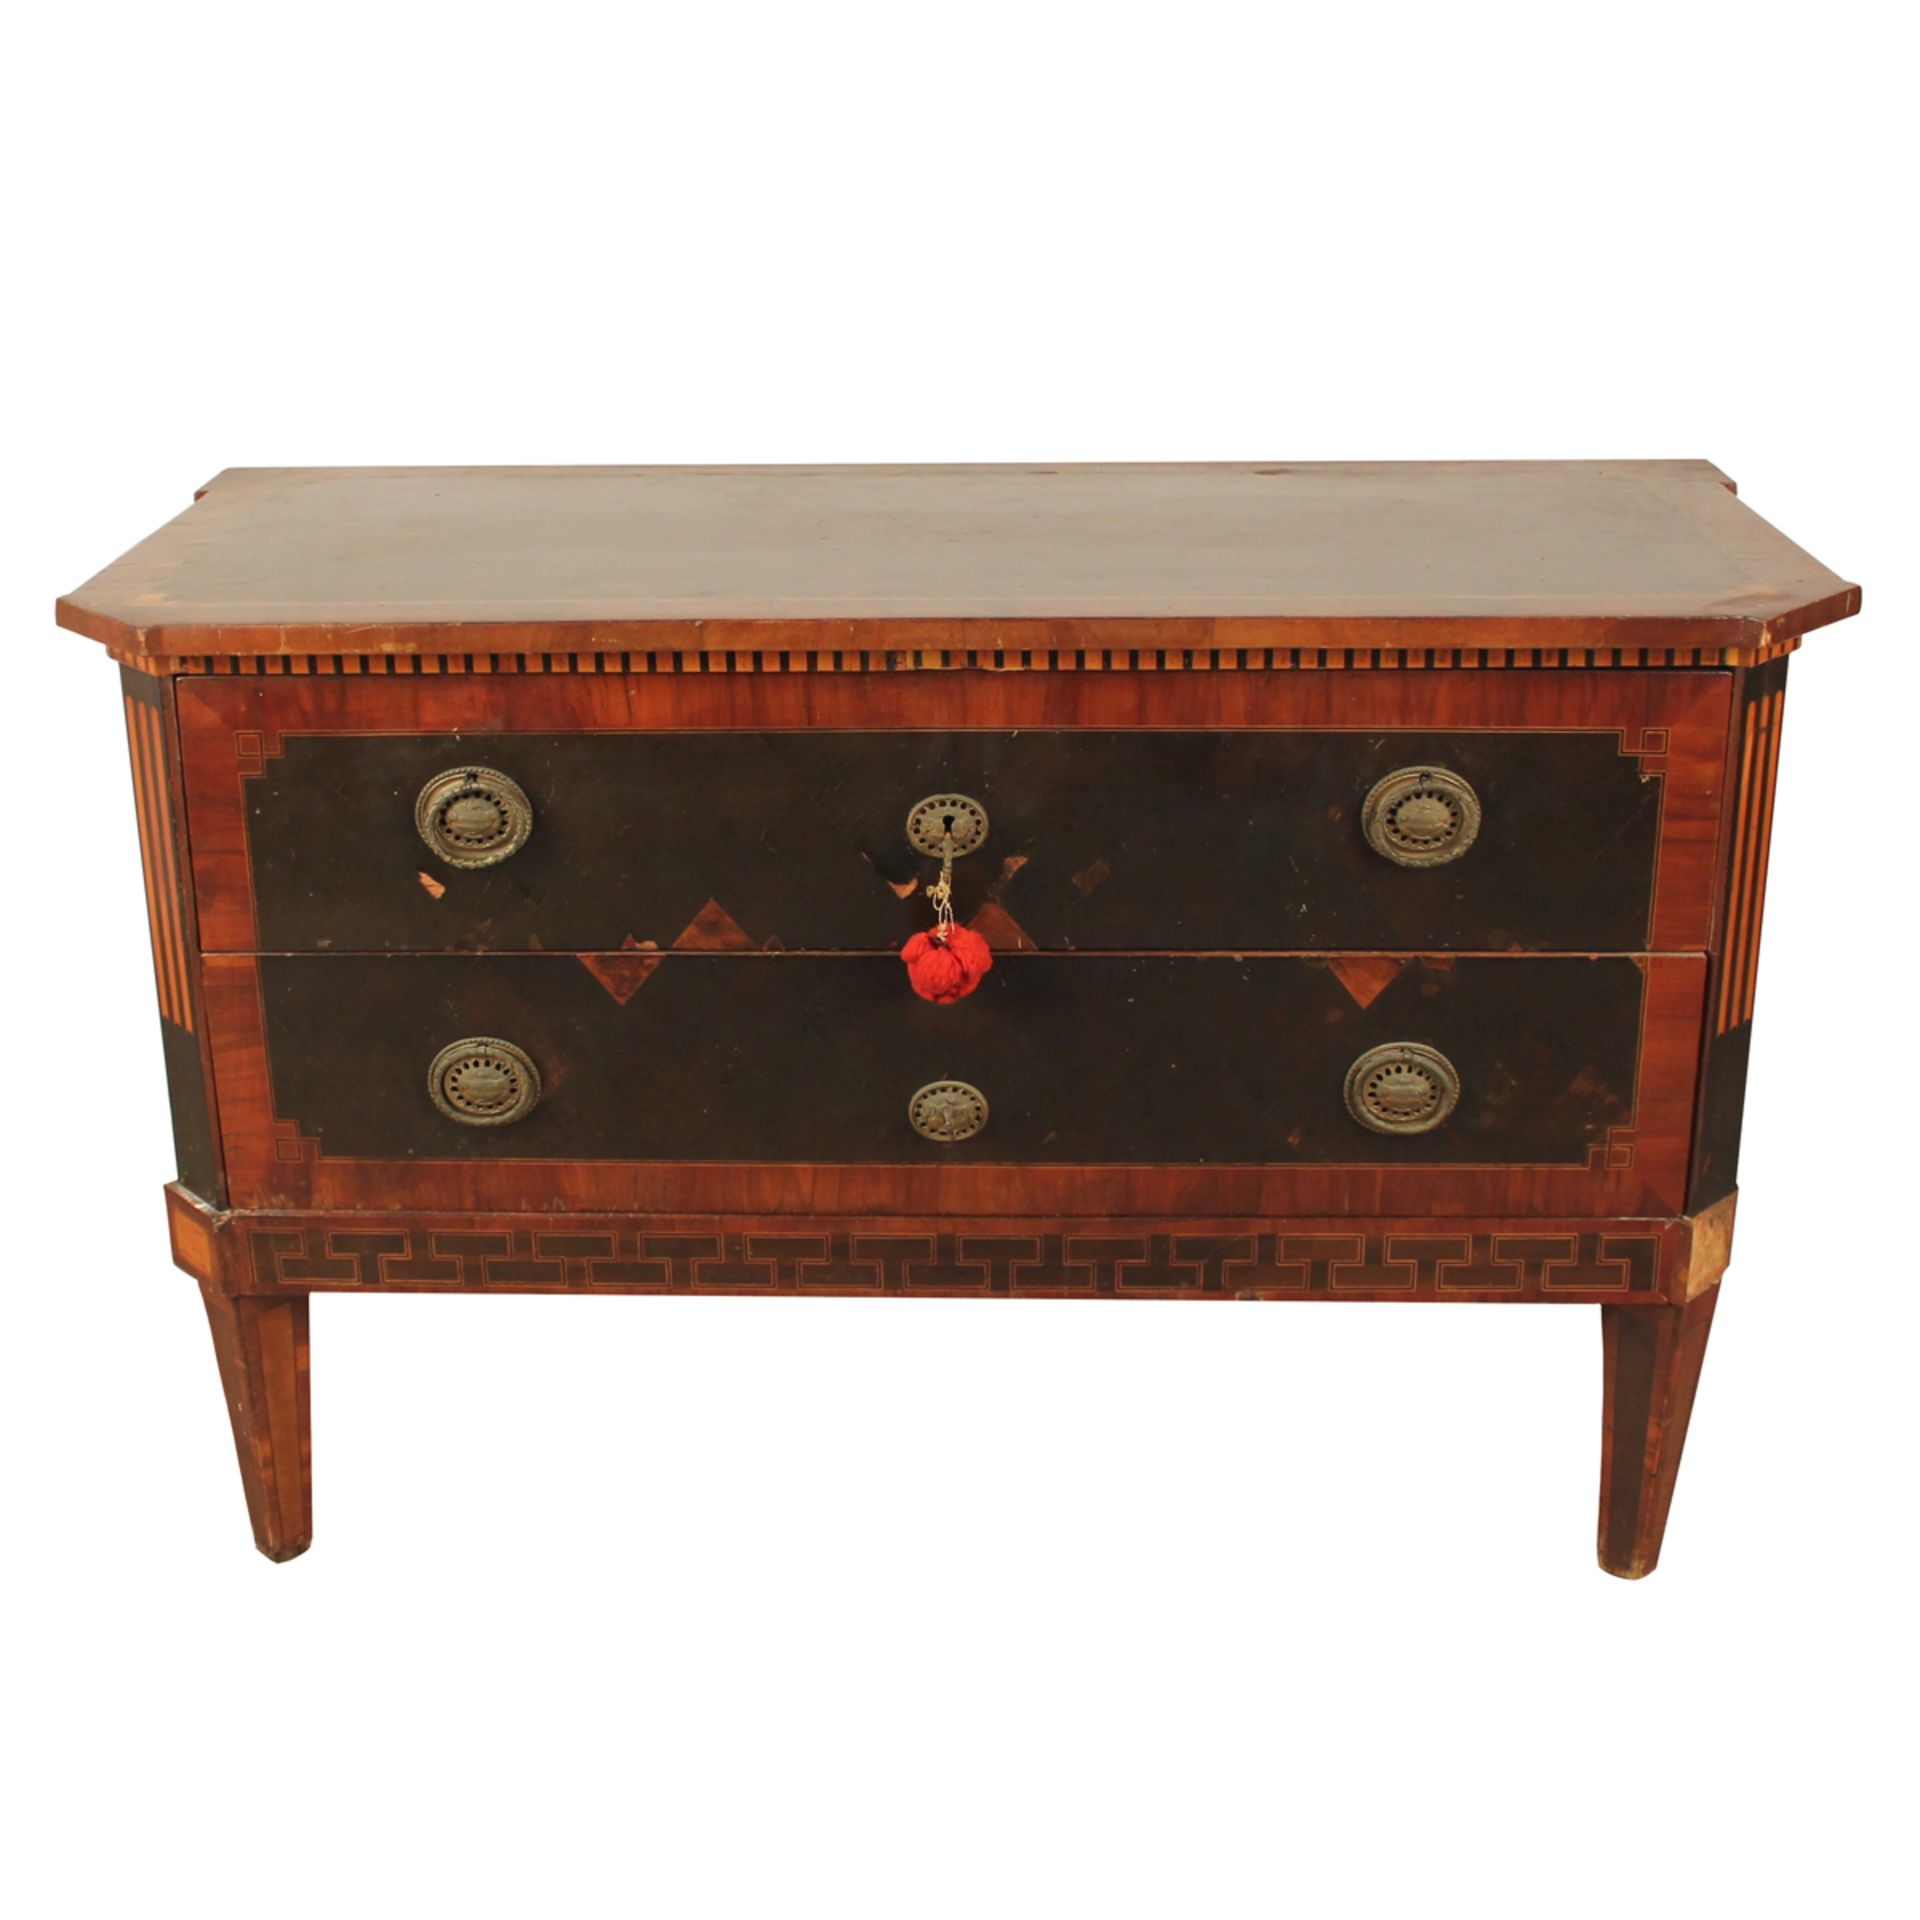 CASSETTONE A DUE CASSETTI - COMMODE WITH TWO DRAWERS